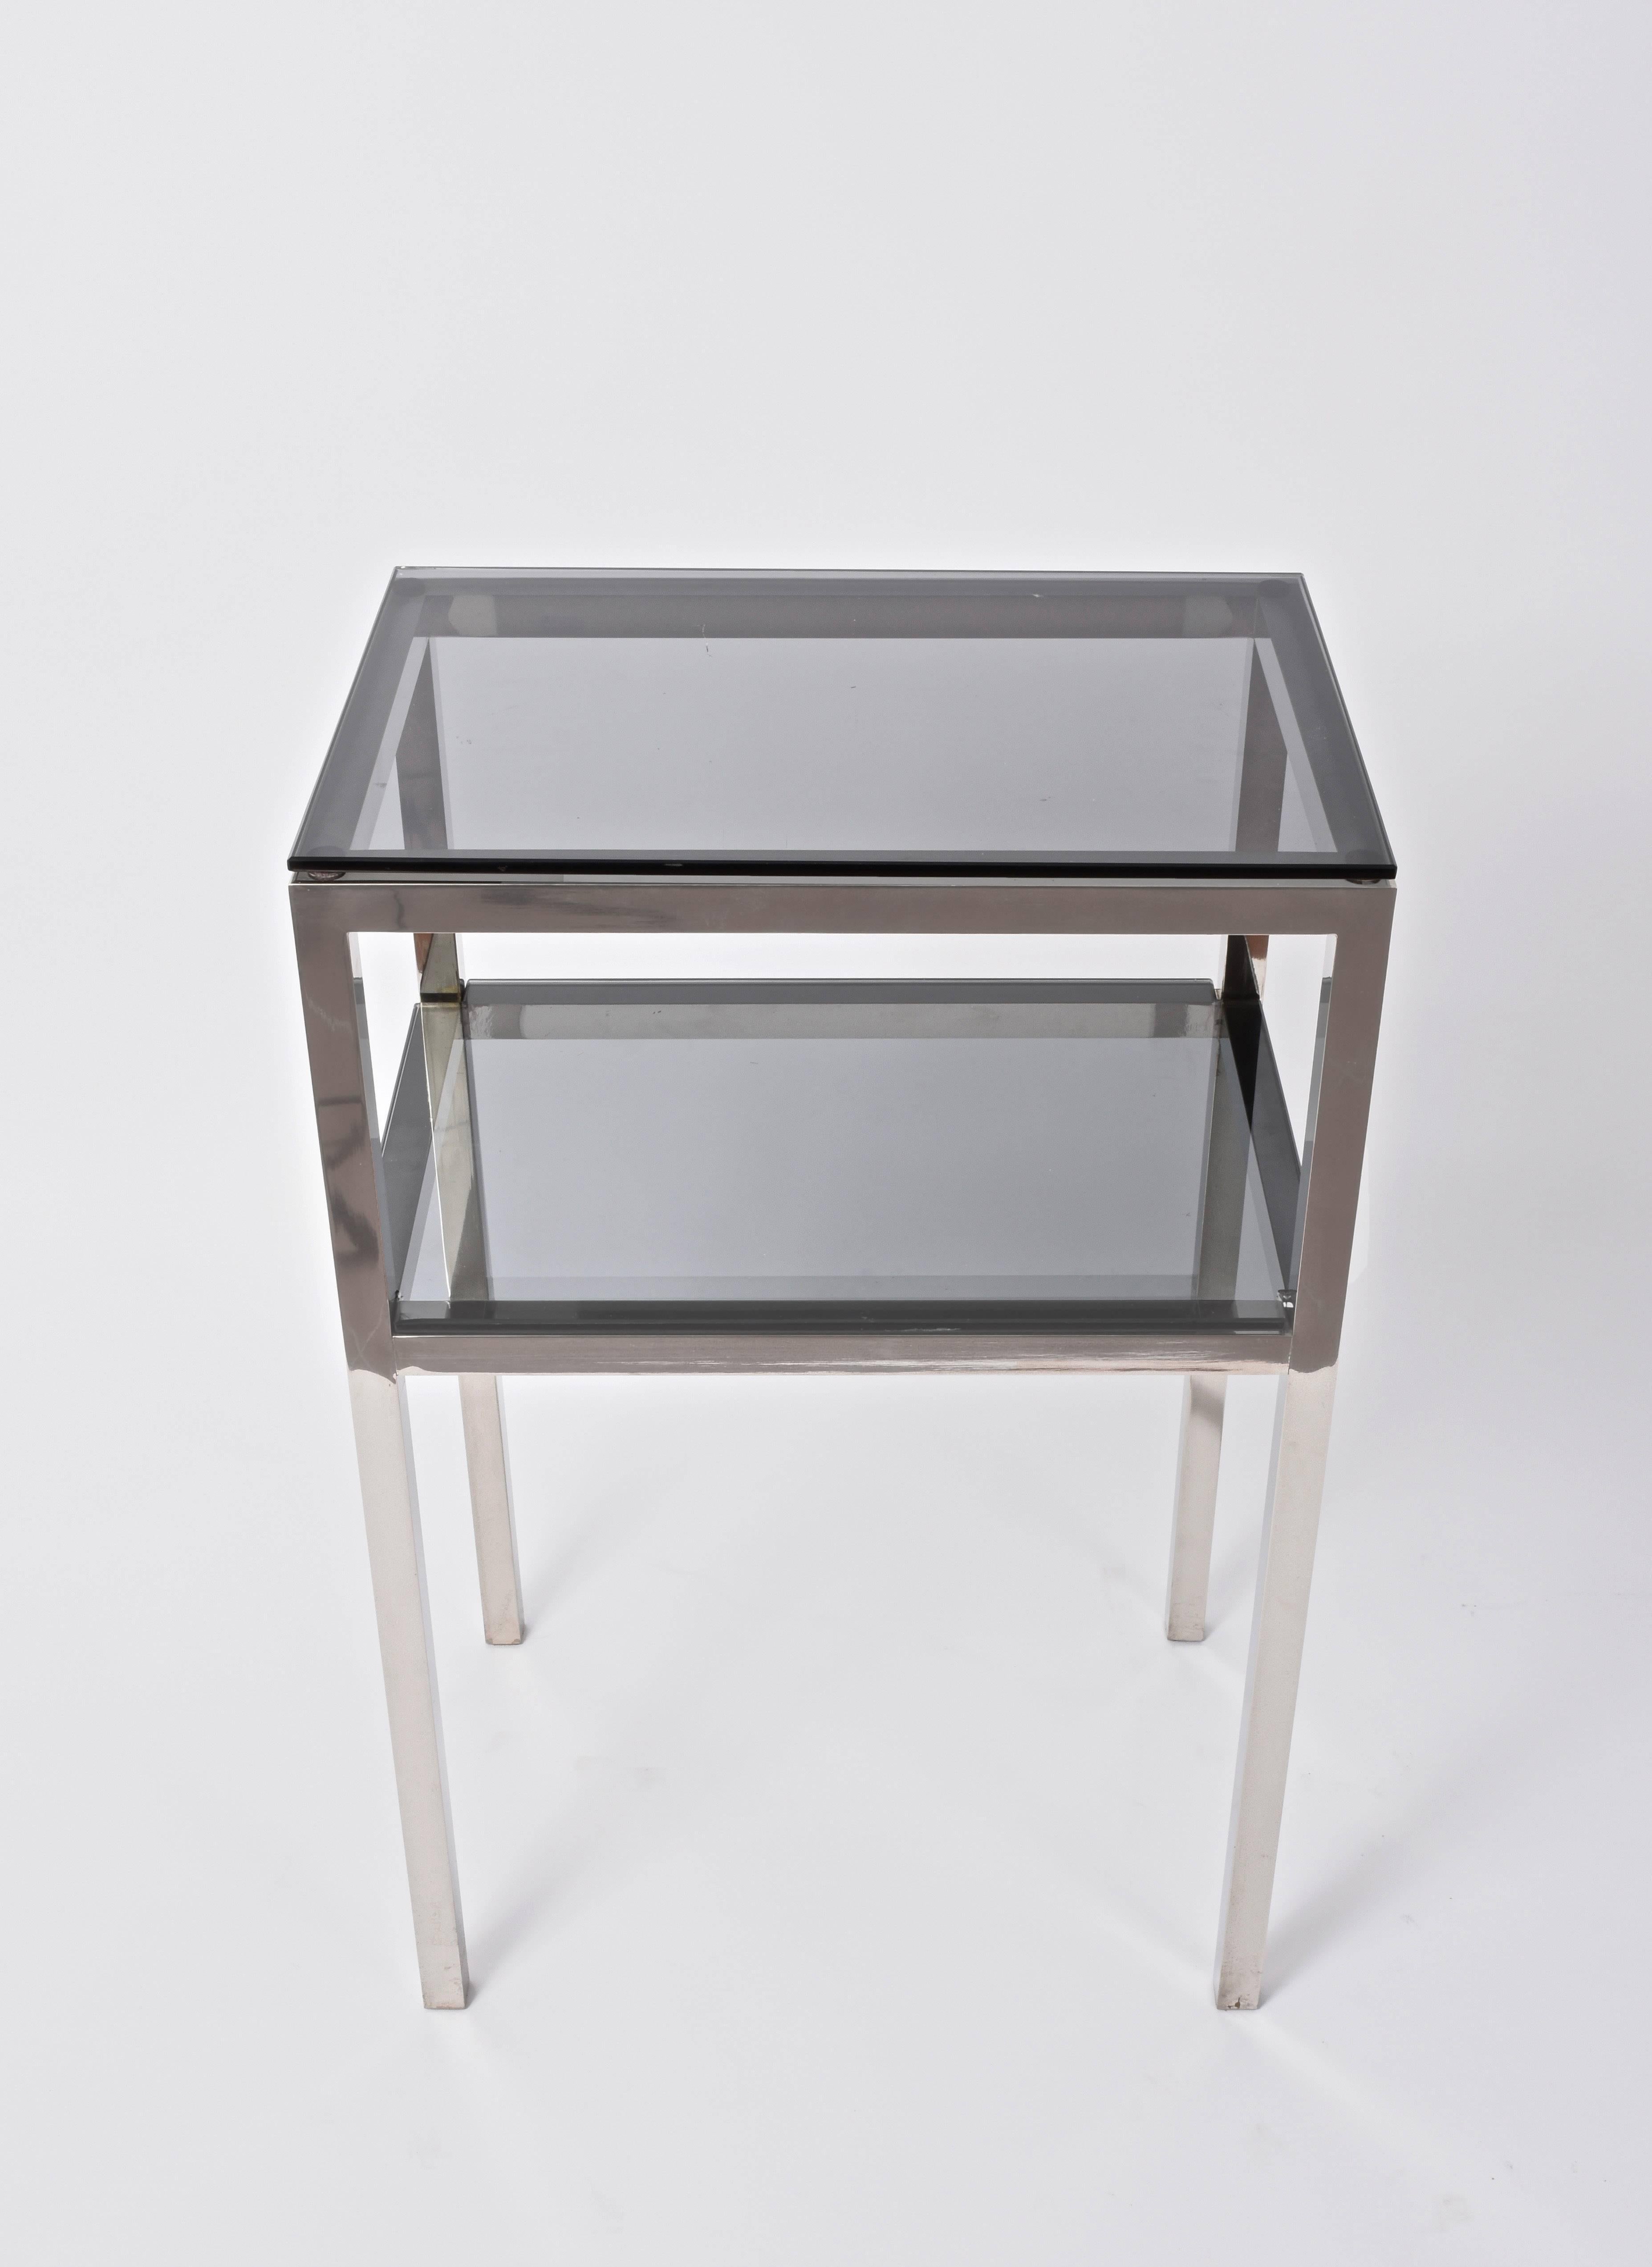 20th Century Pair of Mid-Century Two-Tiered Accent Tables Attributed to Romeo Rega, Italy